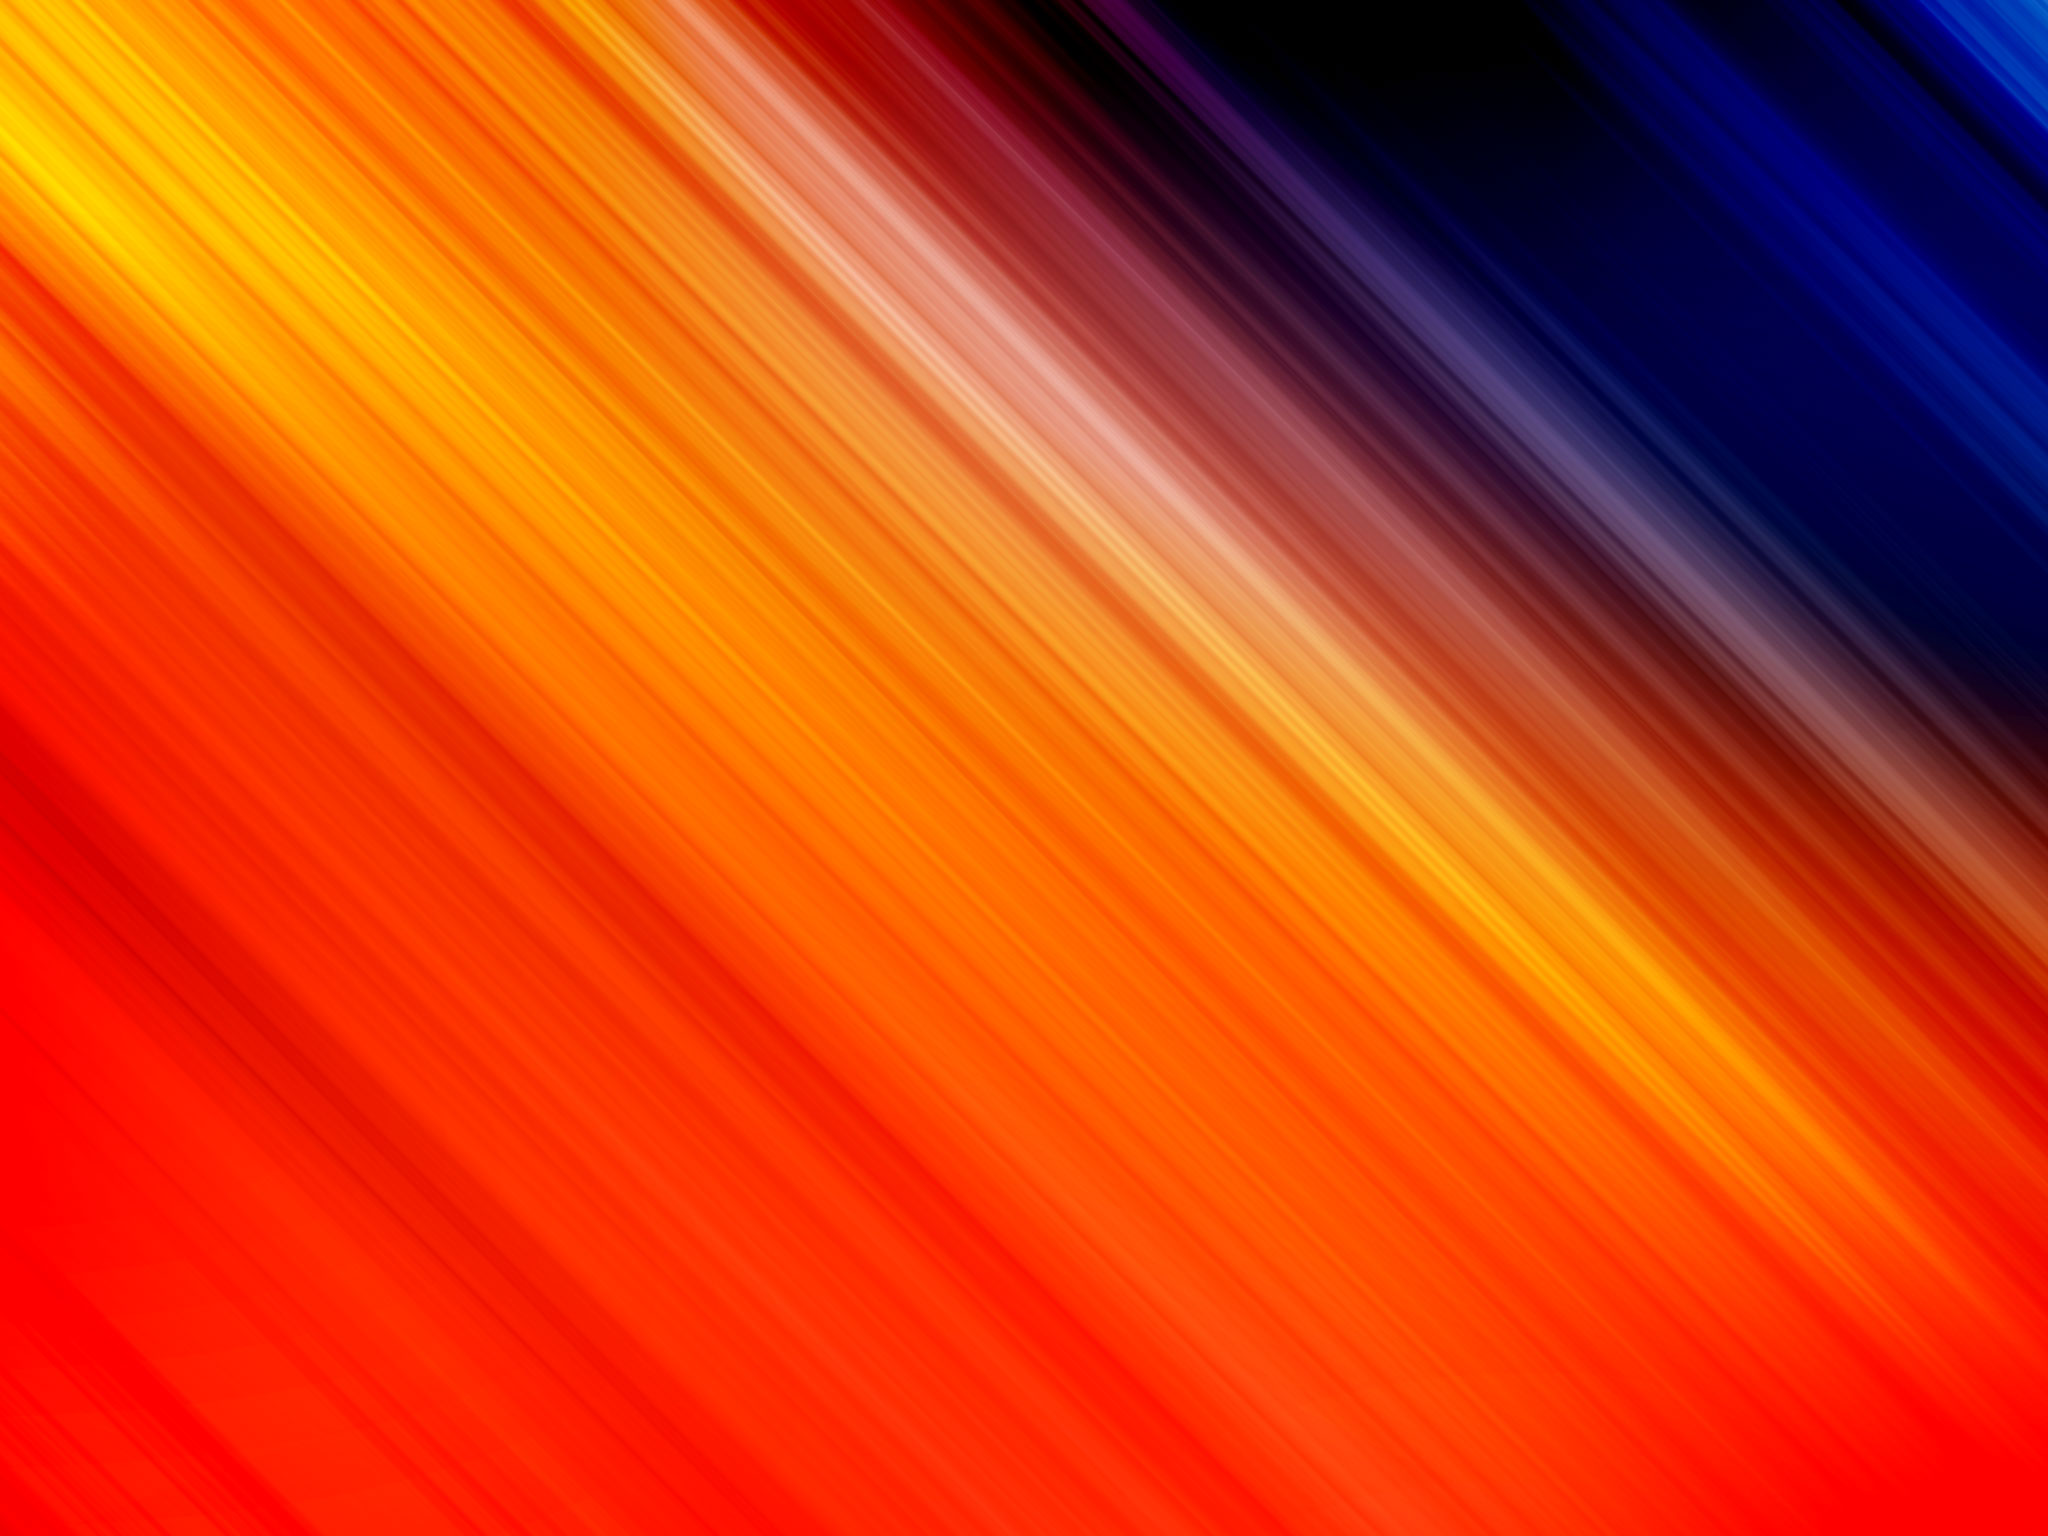 Photoshop Quick Tip : How to Create an Abstract Desktop Wallpaper